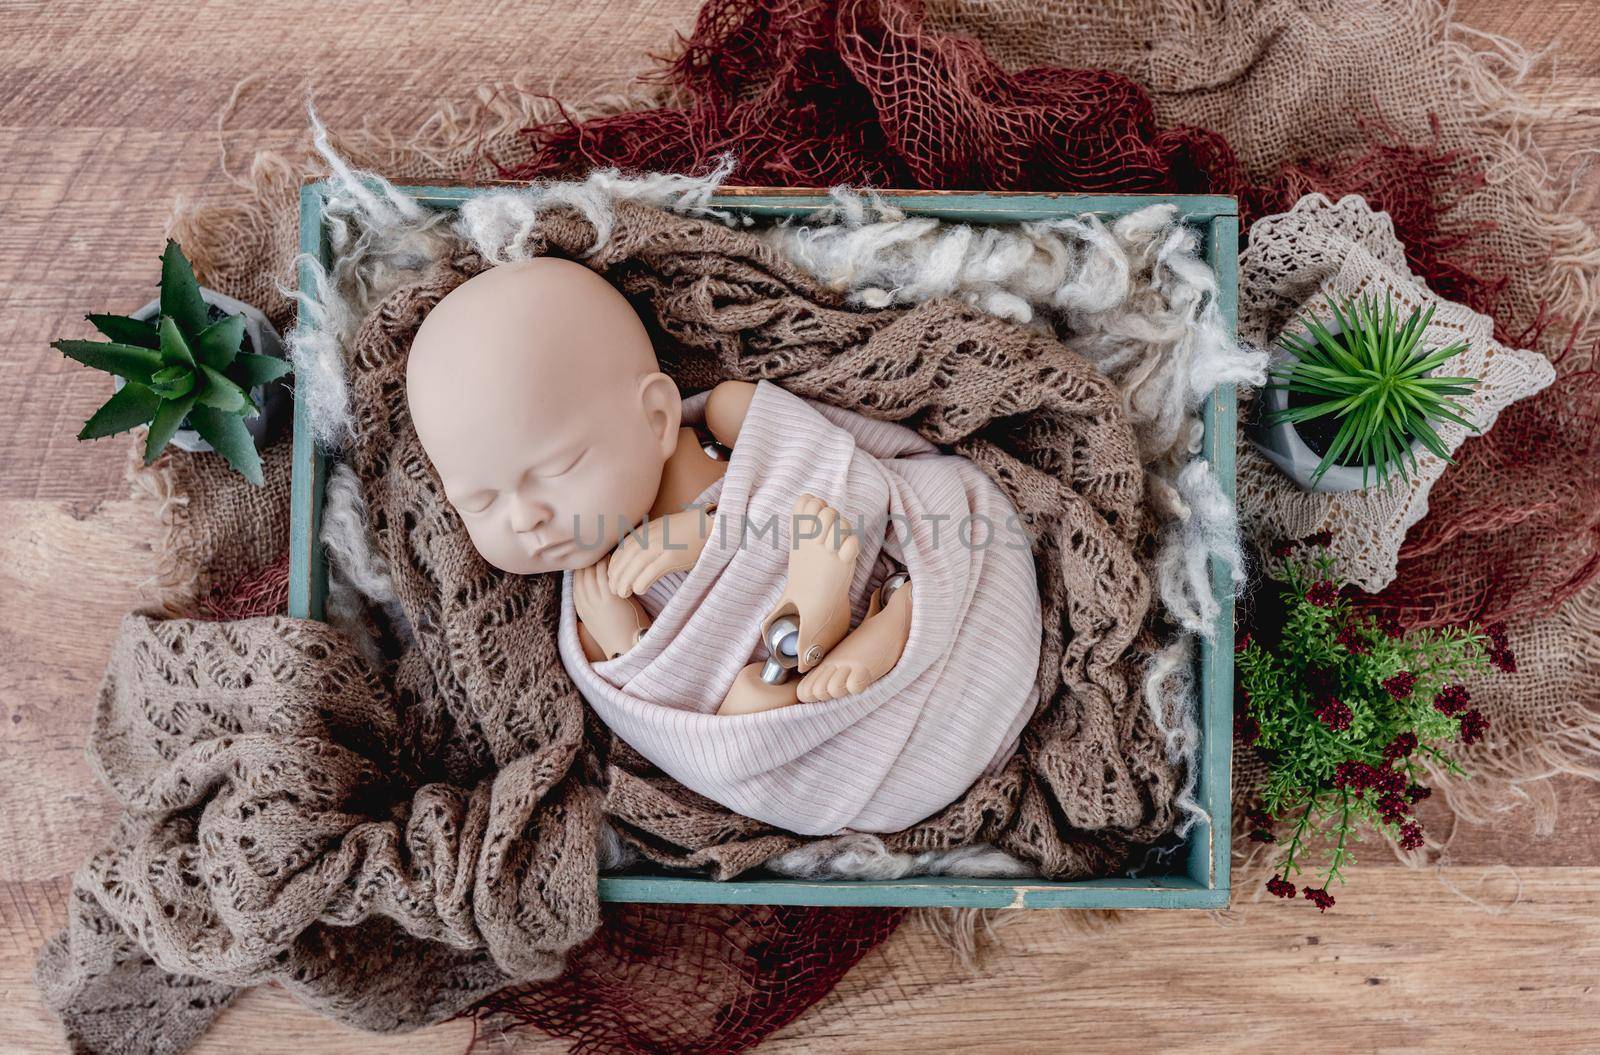 Beautiful background for newborn photosession with colorful plants and infant manequen for photographer trainings. Digital composite with wooden box filled with fur and standing on sackcloth